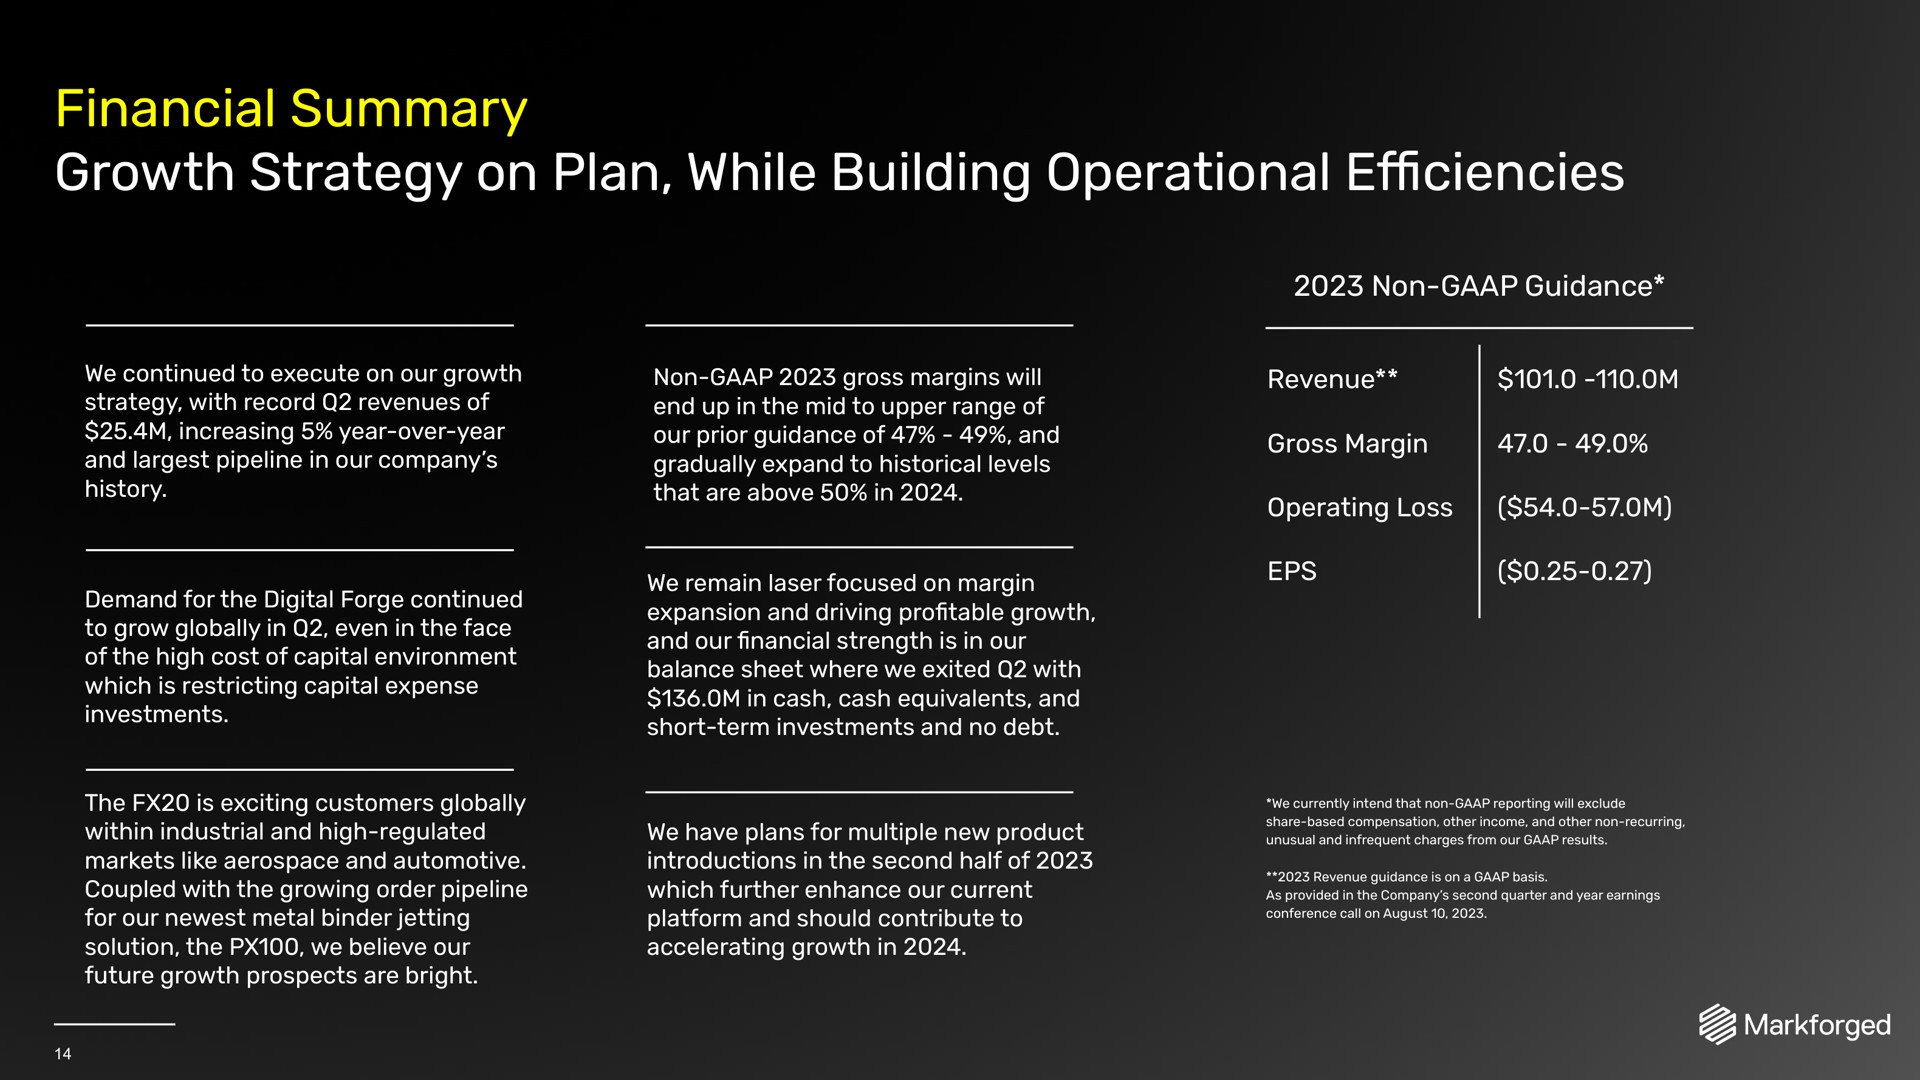 financial summary growth strategy on plan while building operational efficiencies | Markforged